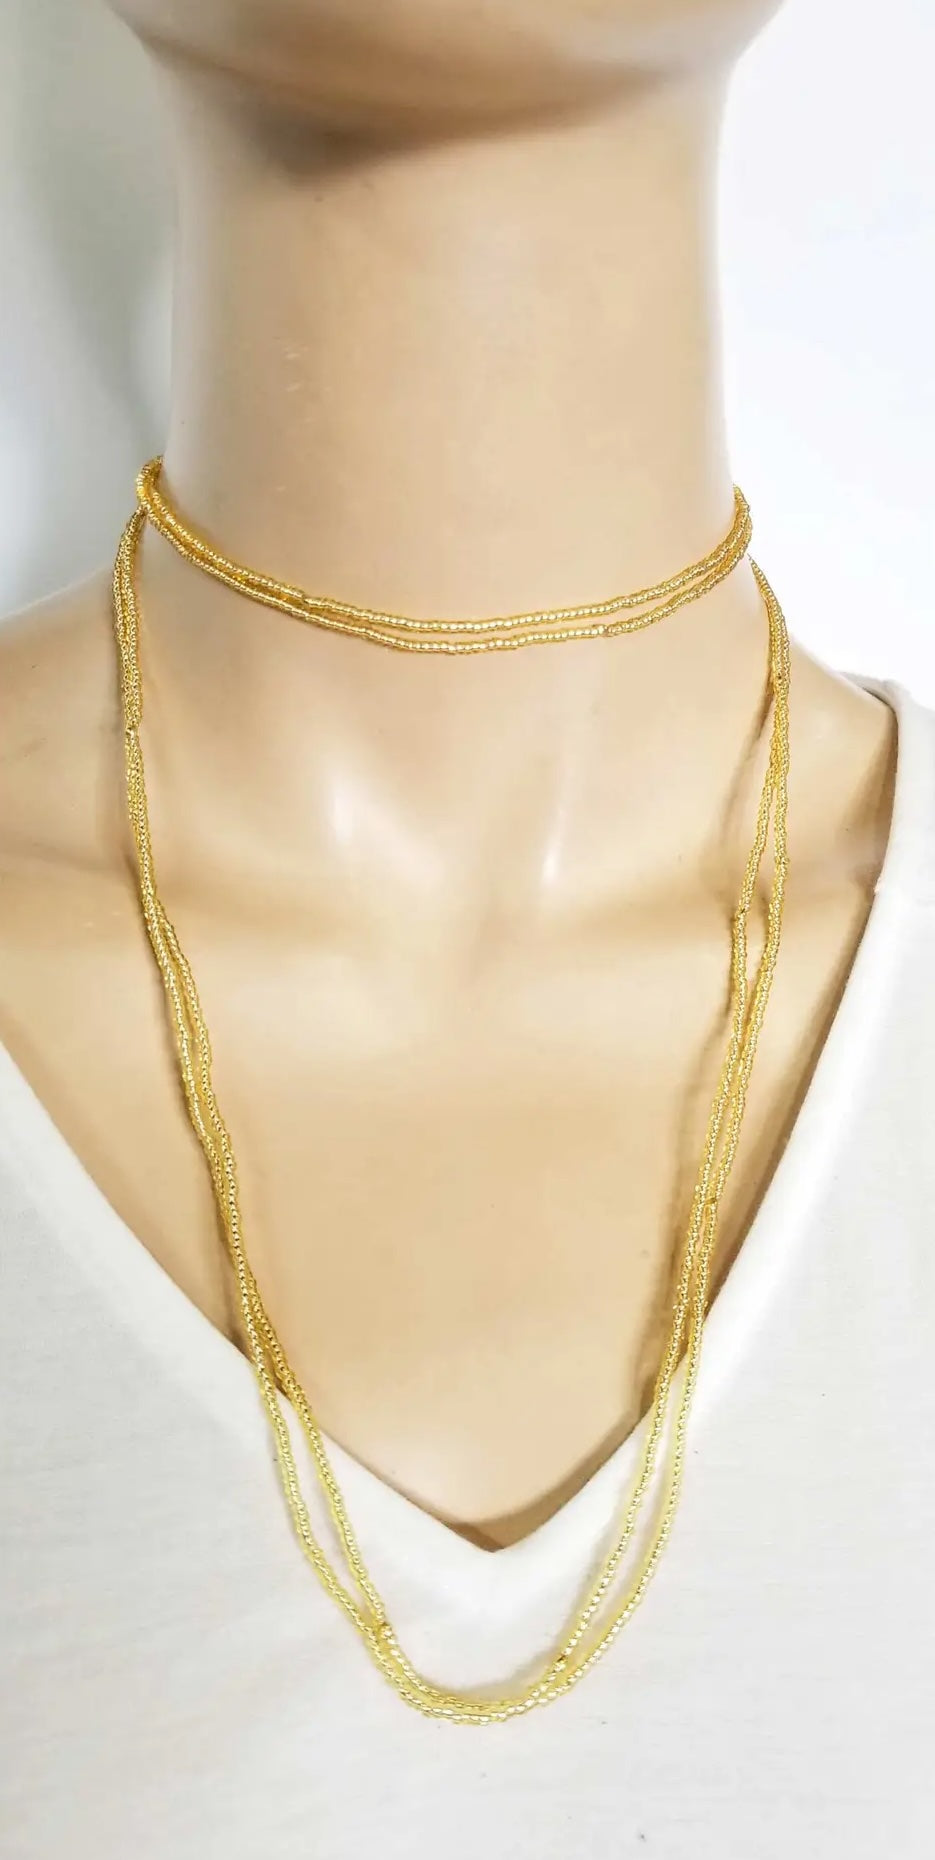 Necklace: Extra Long Beaded with Gold Tone Accent